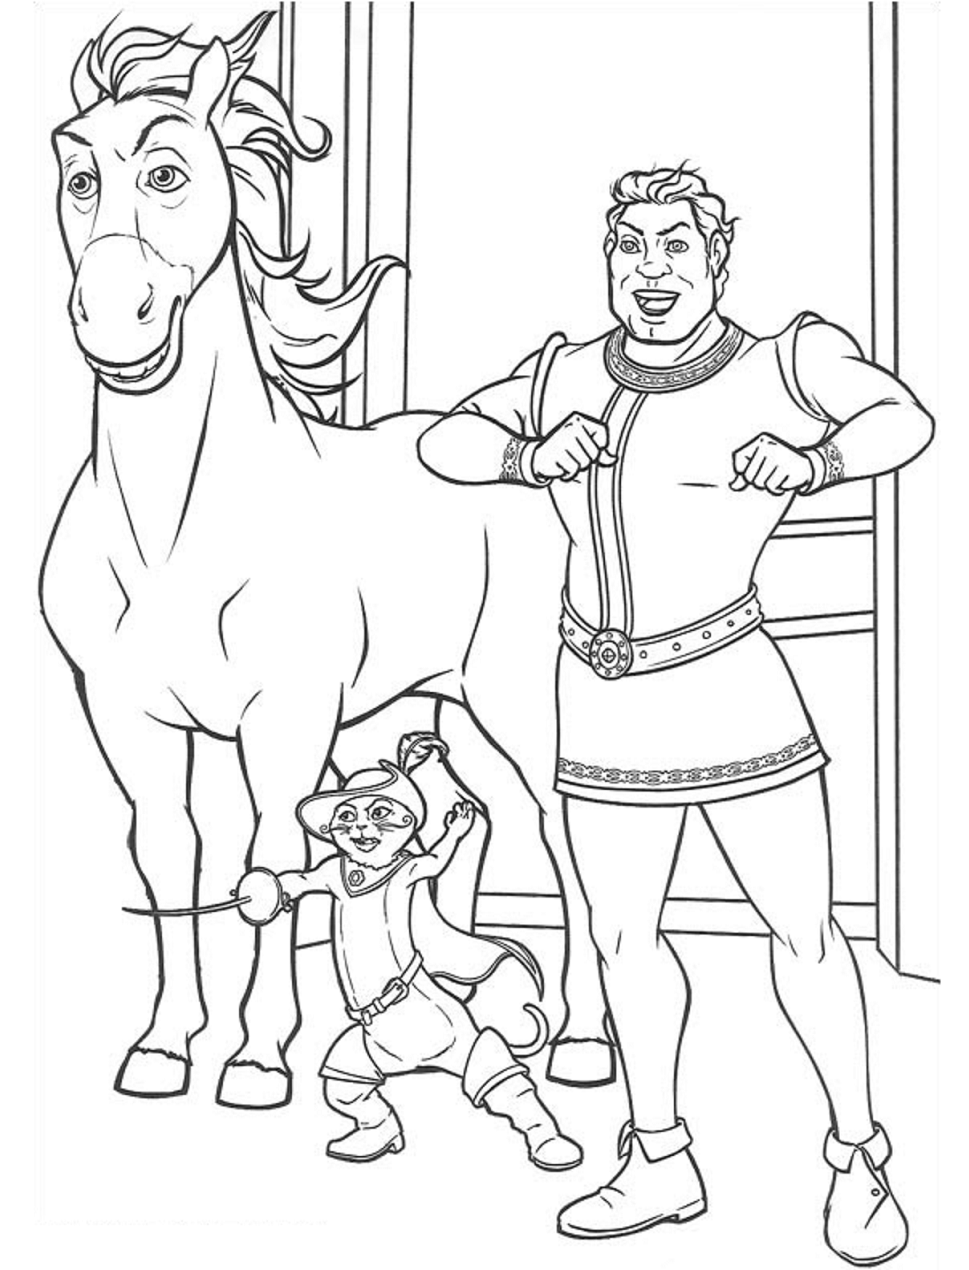 donkey and puss coloring page Pictures of puss in boots